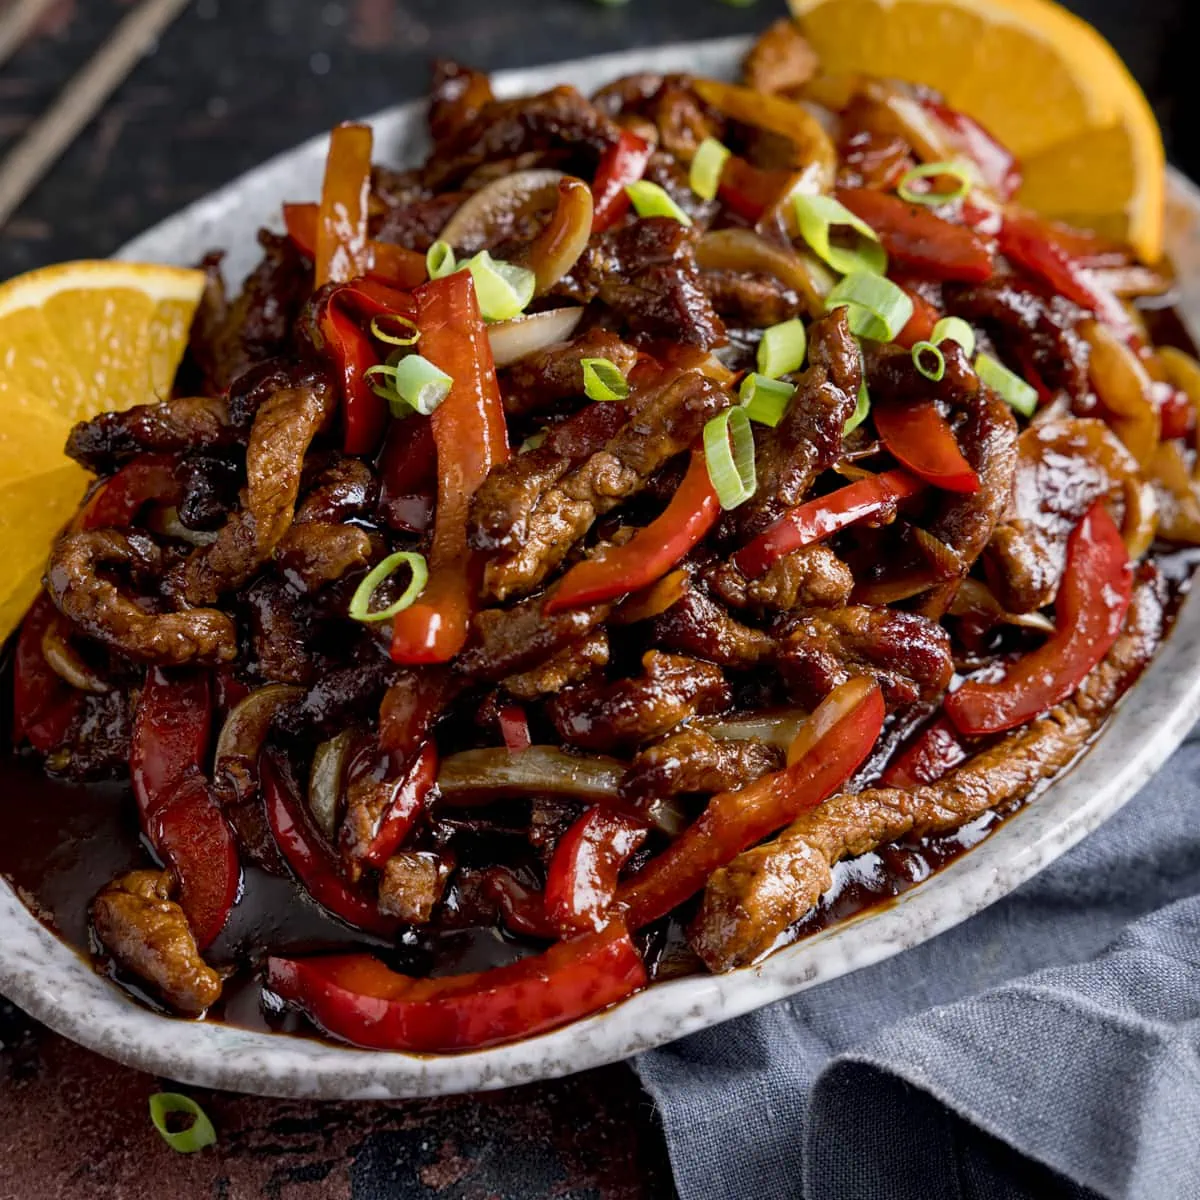 Crispy orange beef with peppers and onions on a shallow oval plate. There are slices of orange on the plate.